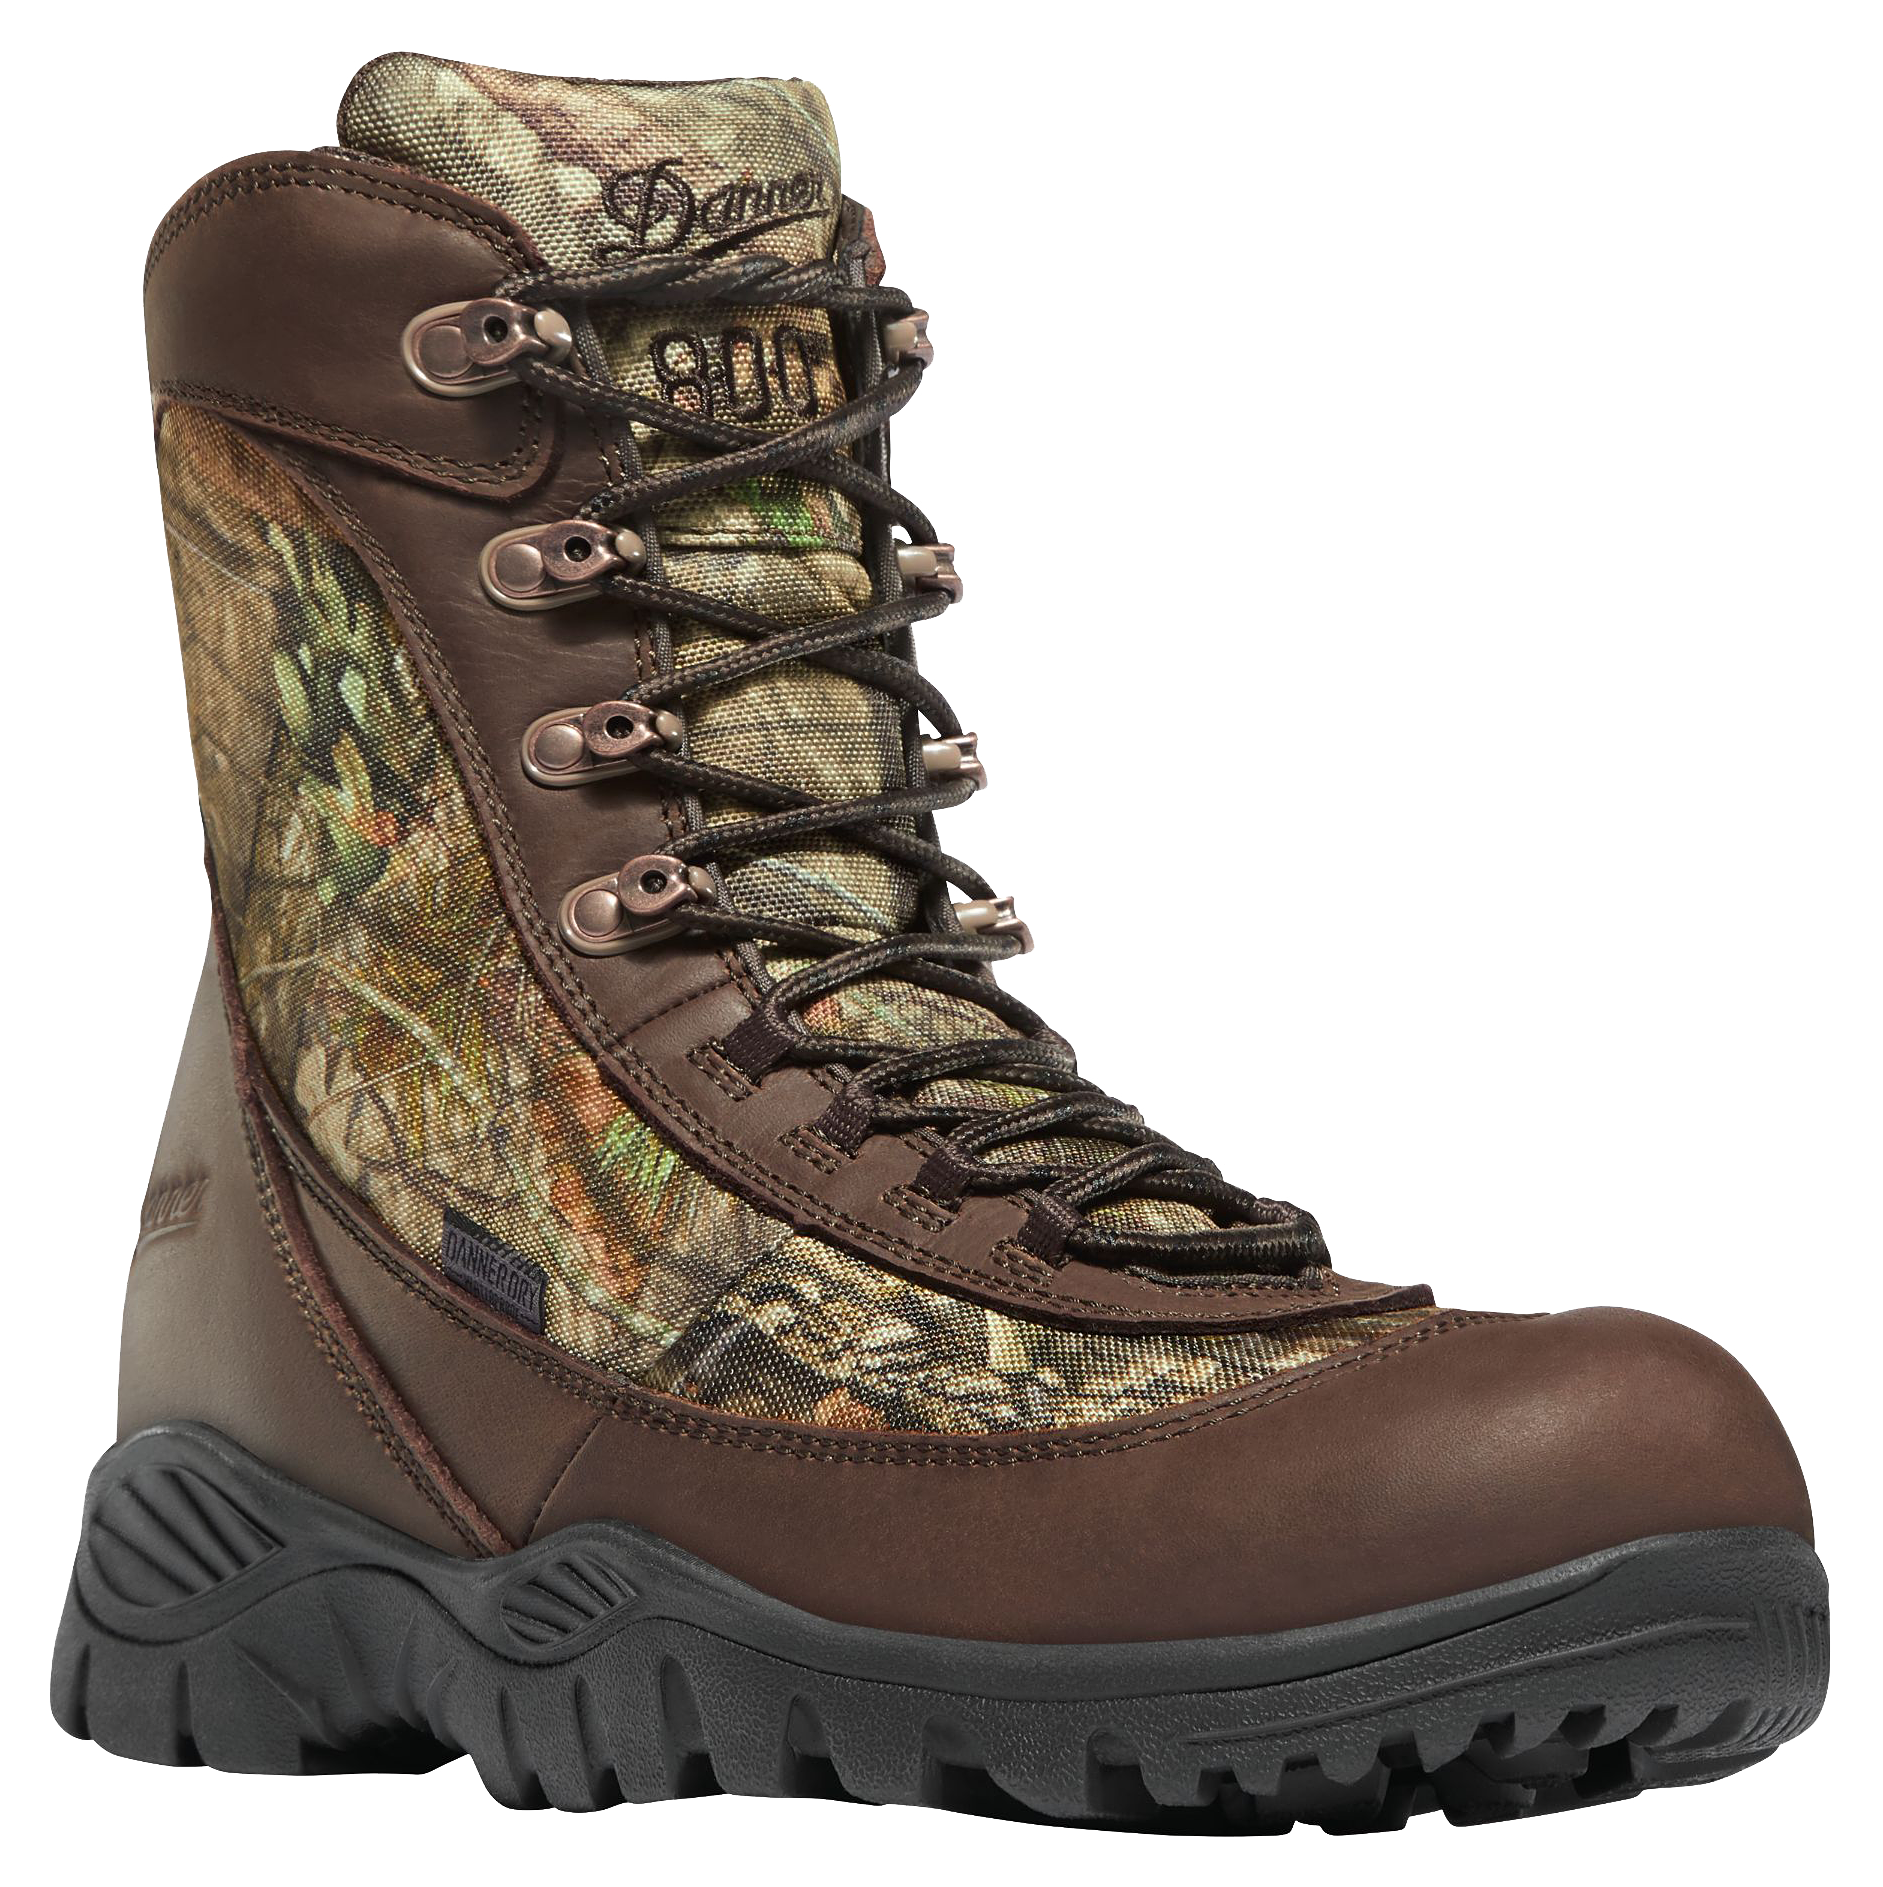 Danner Element 8″ 800-Gram Insulated Waterproof Hunting Boots for Men - Mossy Oak Break-Up Country - 13W